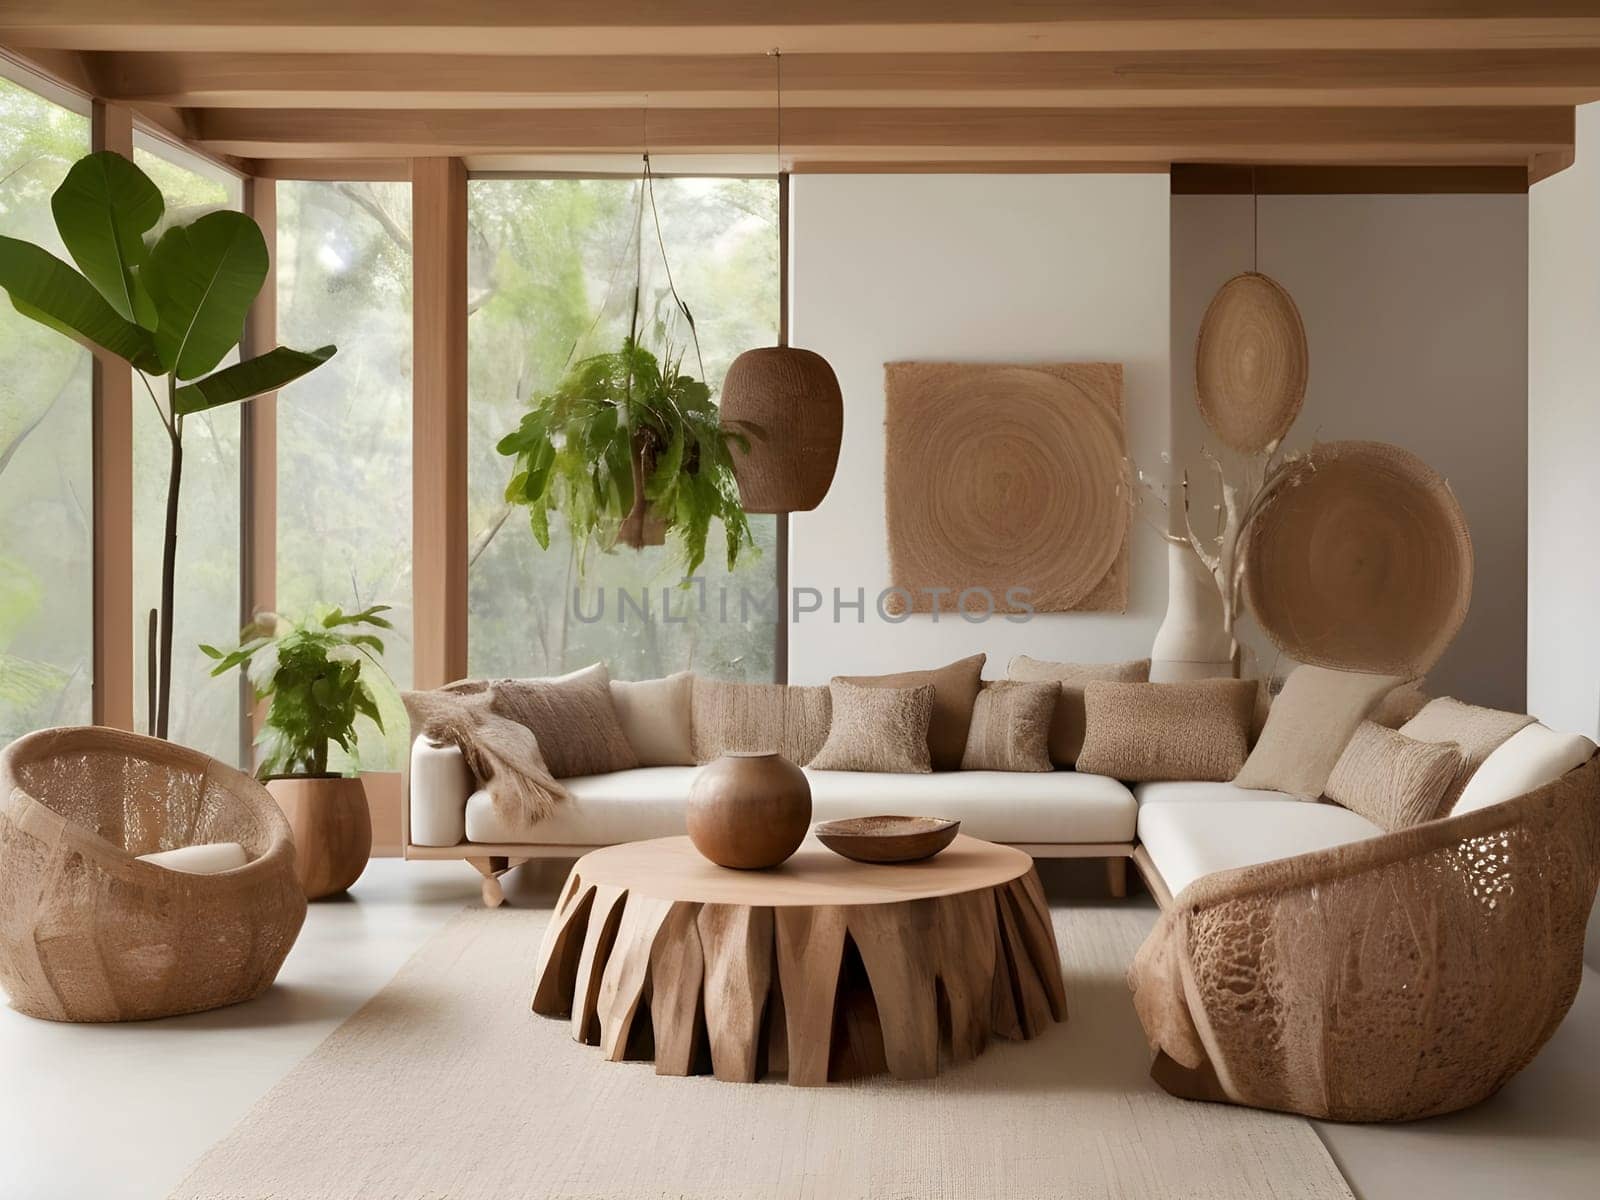 Photograph ecologists incorporating nature-inspired decor elements like natural fibers by mailos